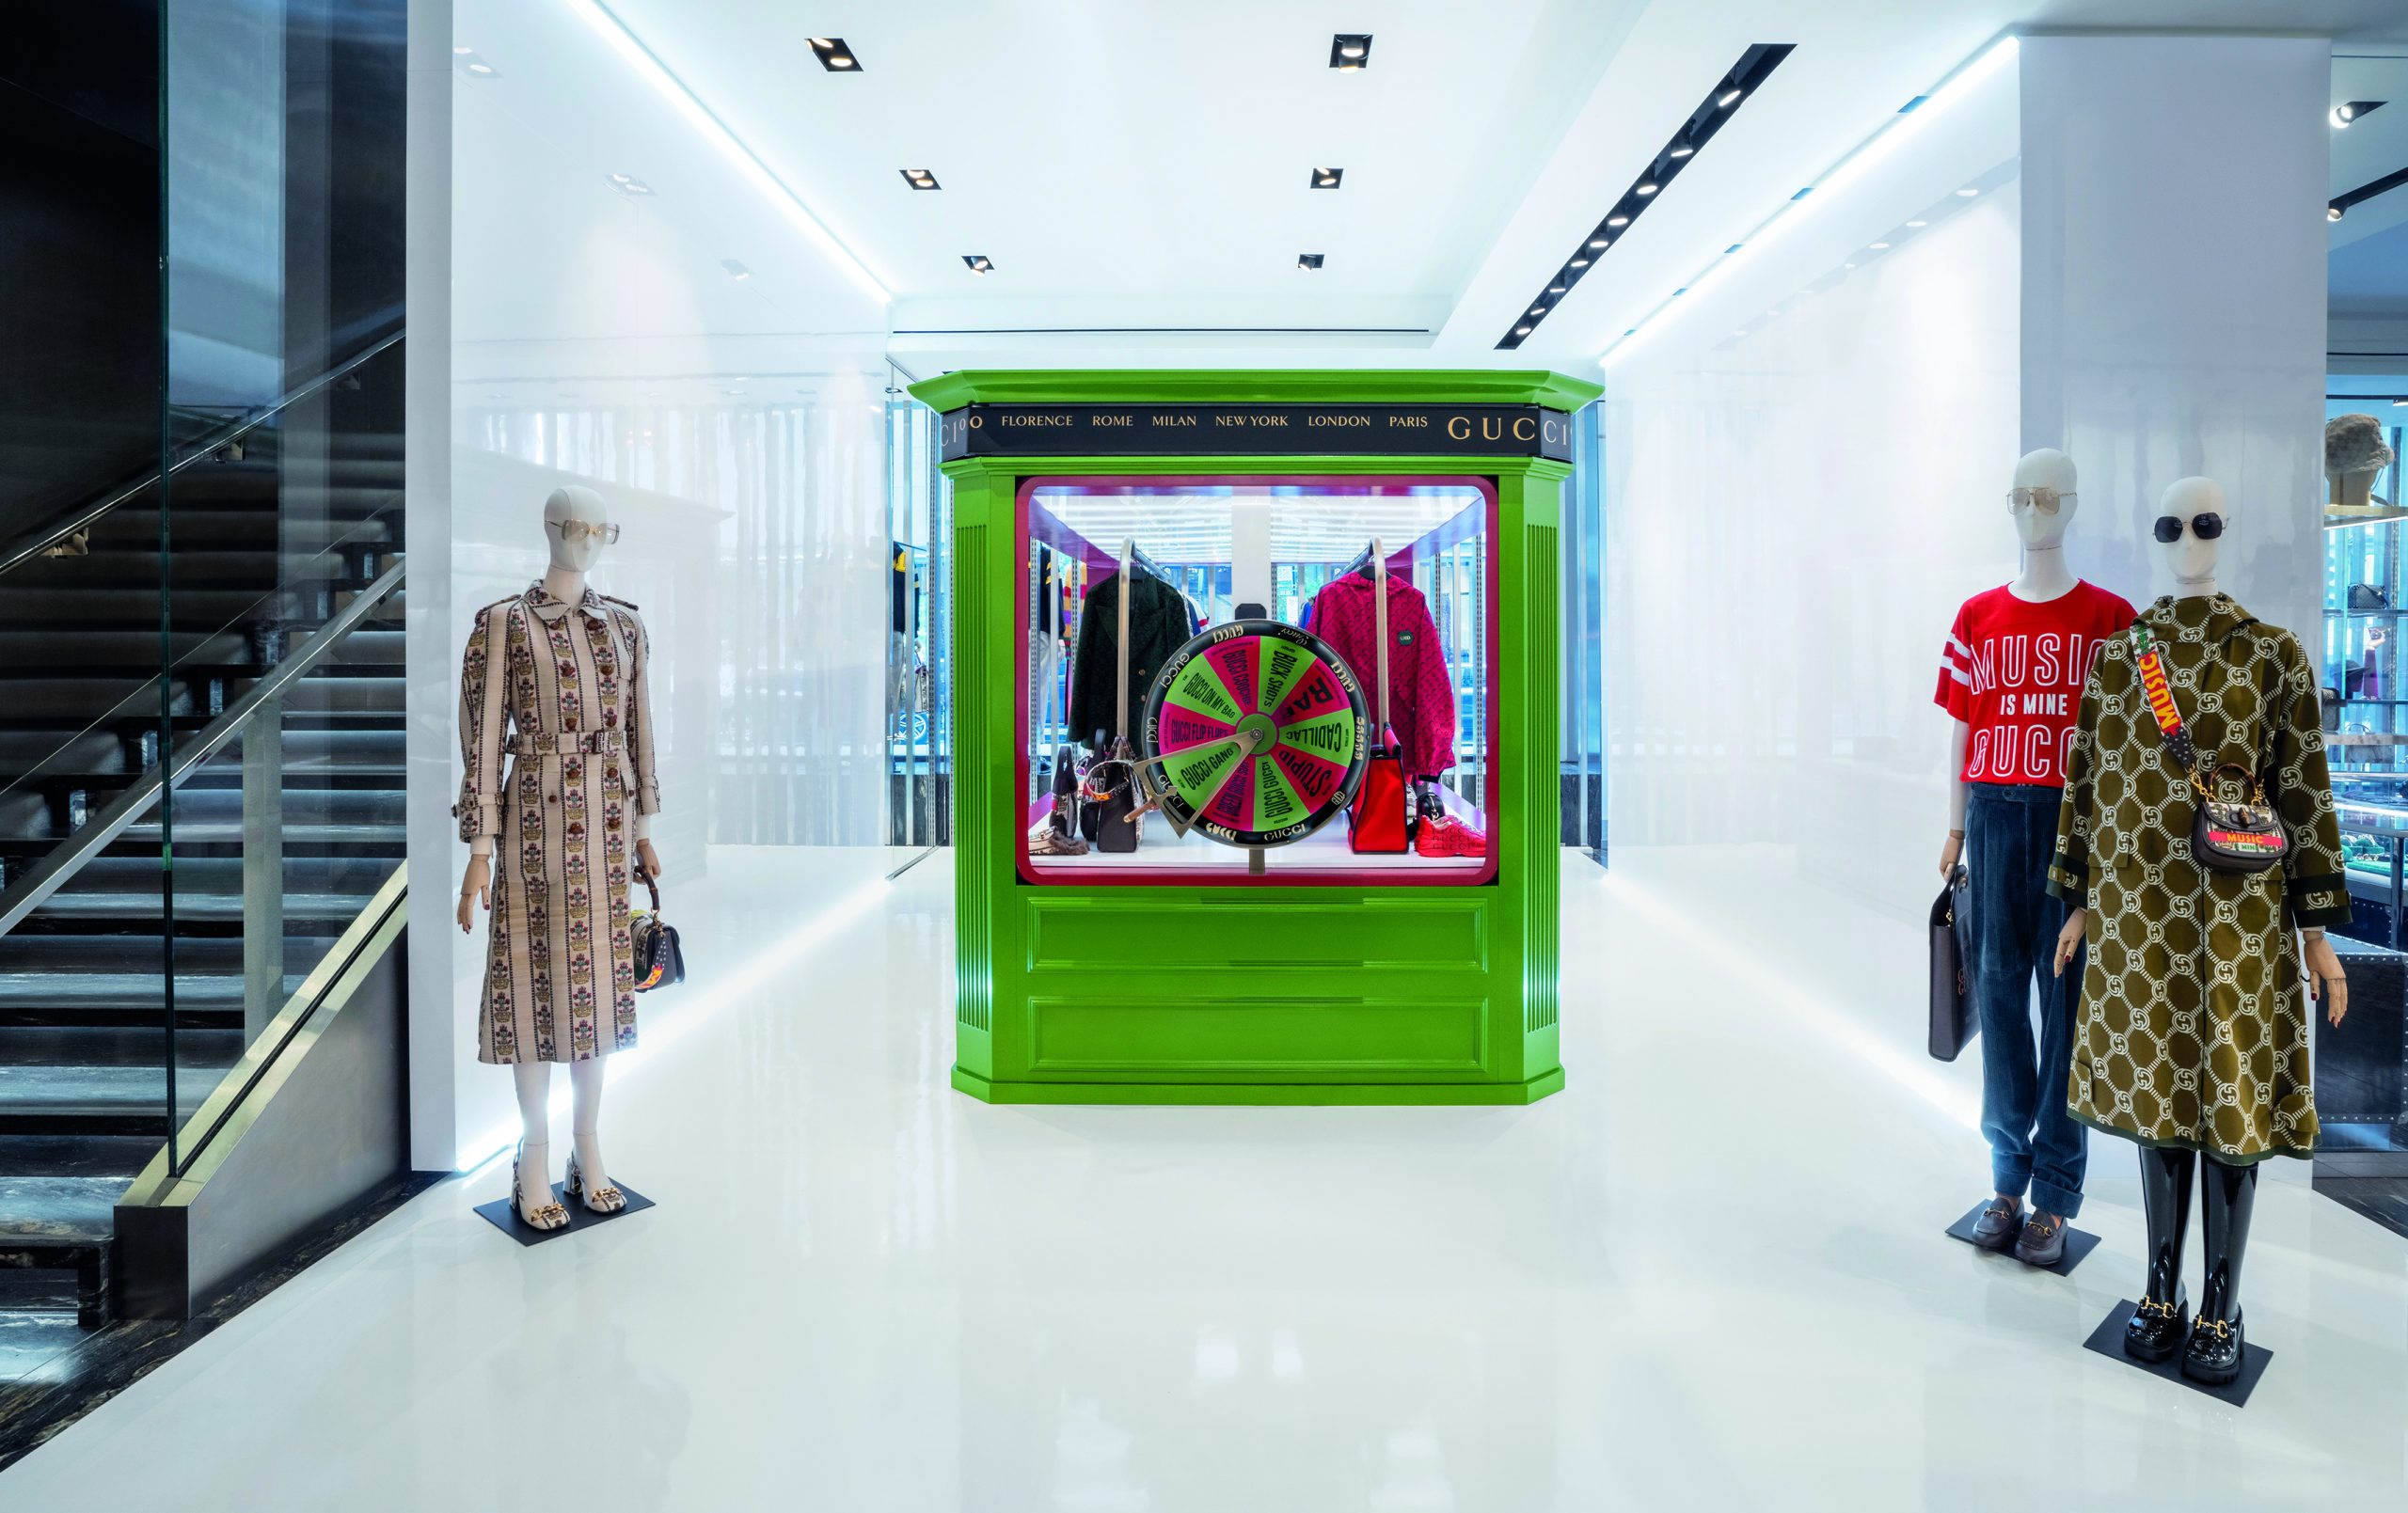 Gucci Launches Series of Global Pop-Up dedicated to the Gucci 100